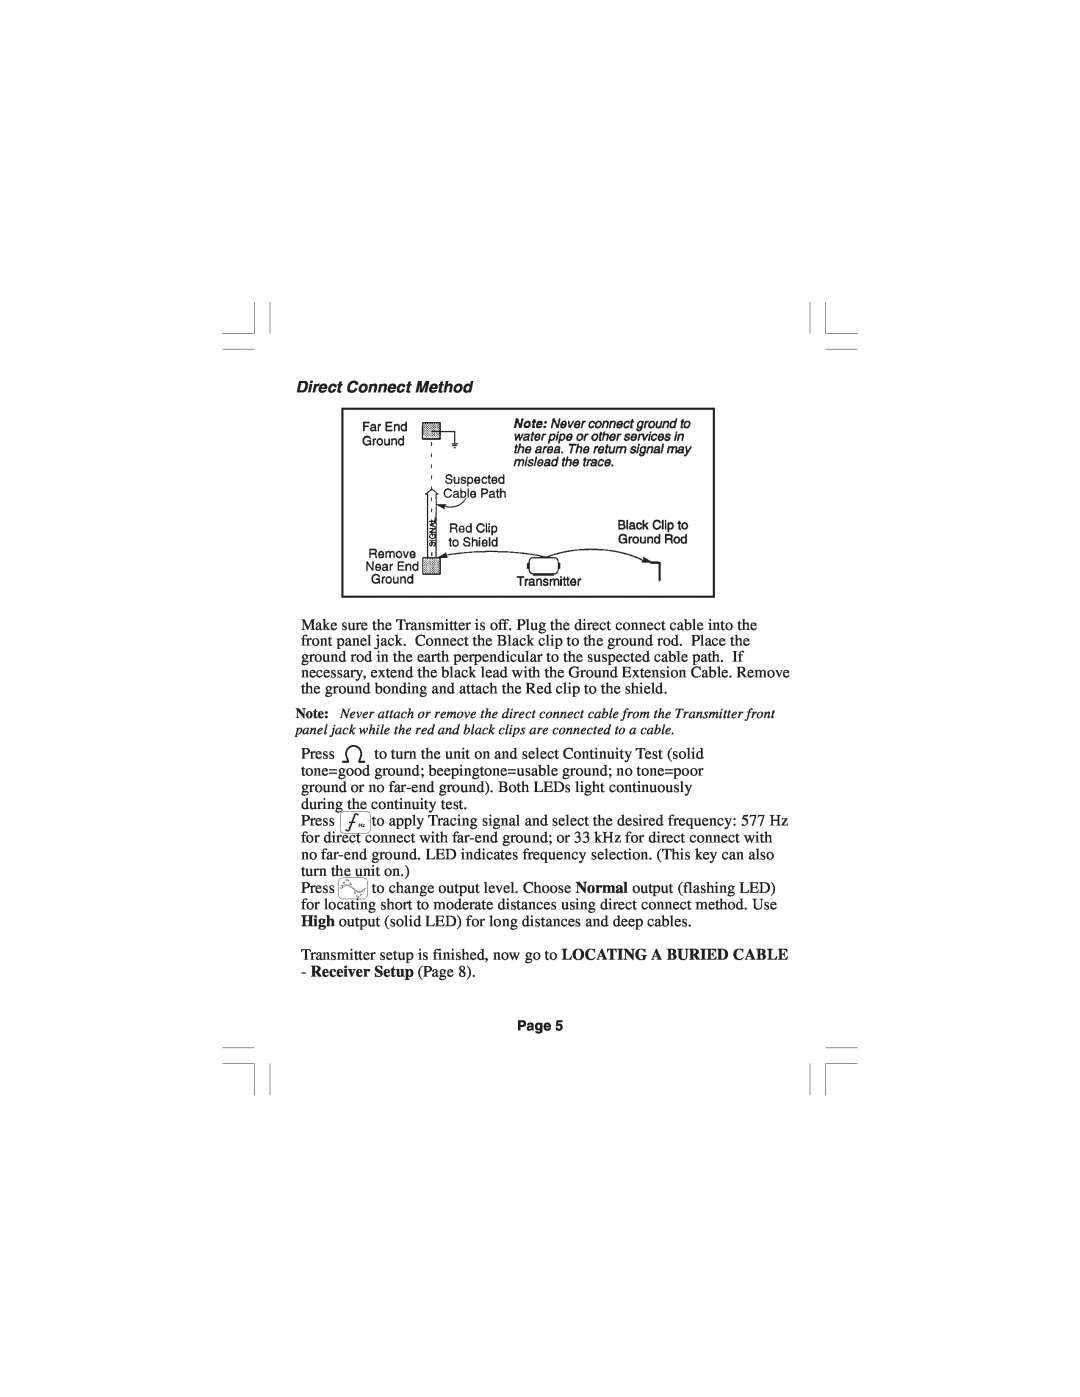 3M 2210E manual Direct Connect Method, Receiver Setup Page 